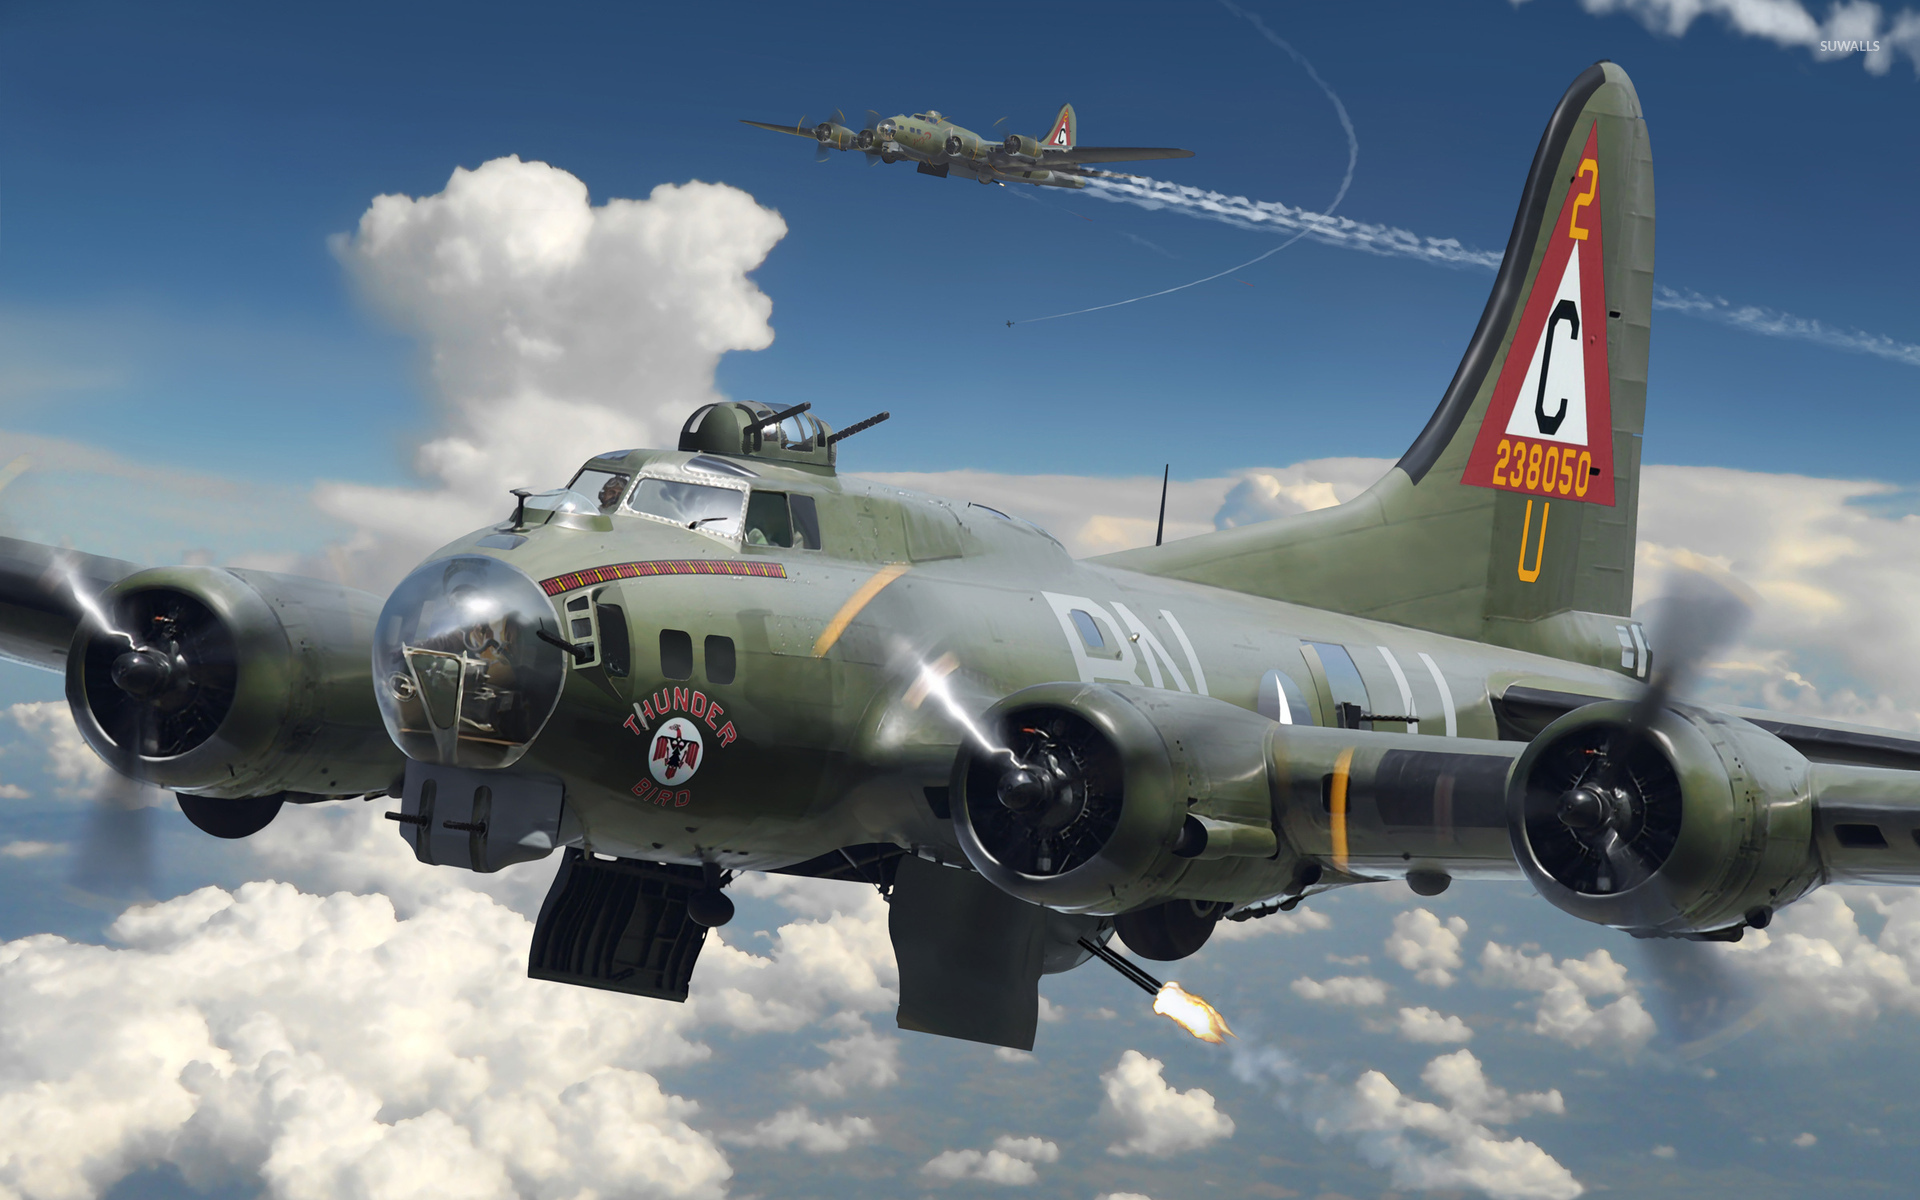 Boeing B-17 Flying Fortress Backgrounds, Compatible - PC, Mobile, Gadgets| 1920x1200 px